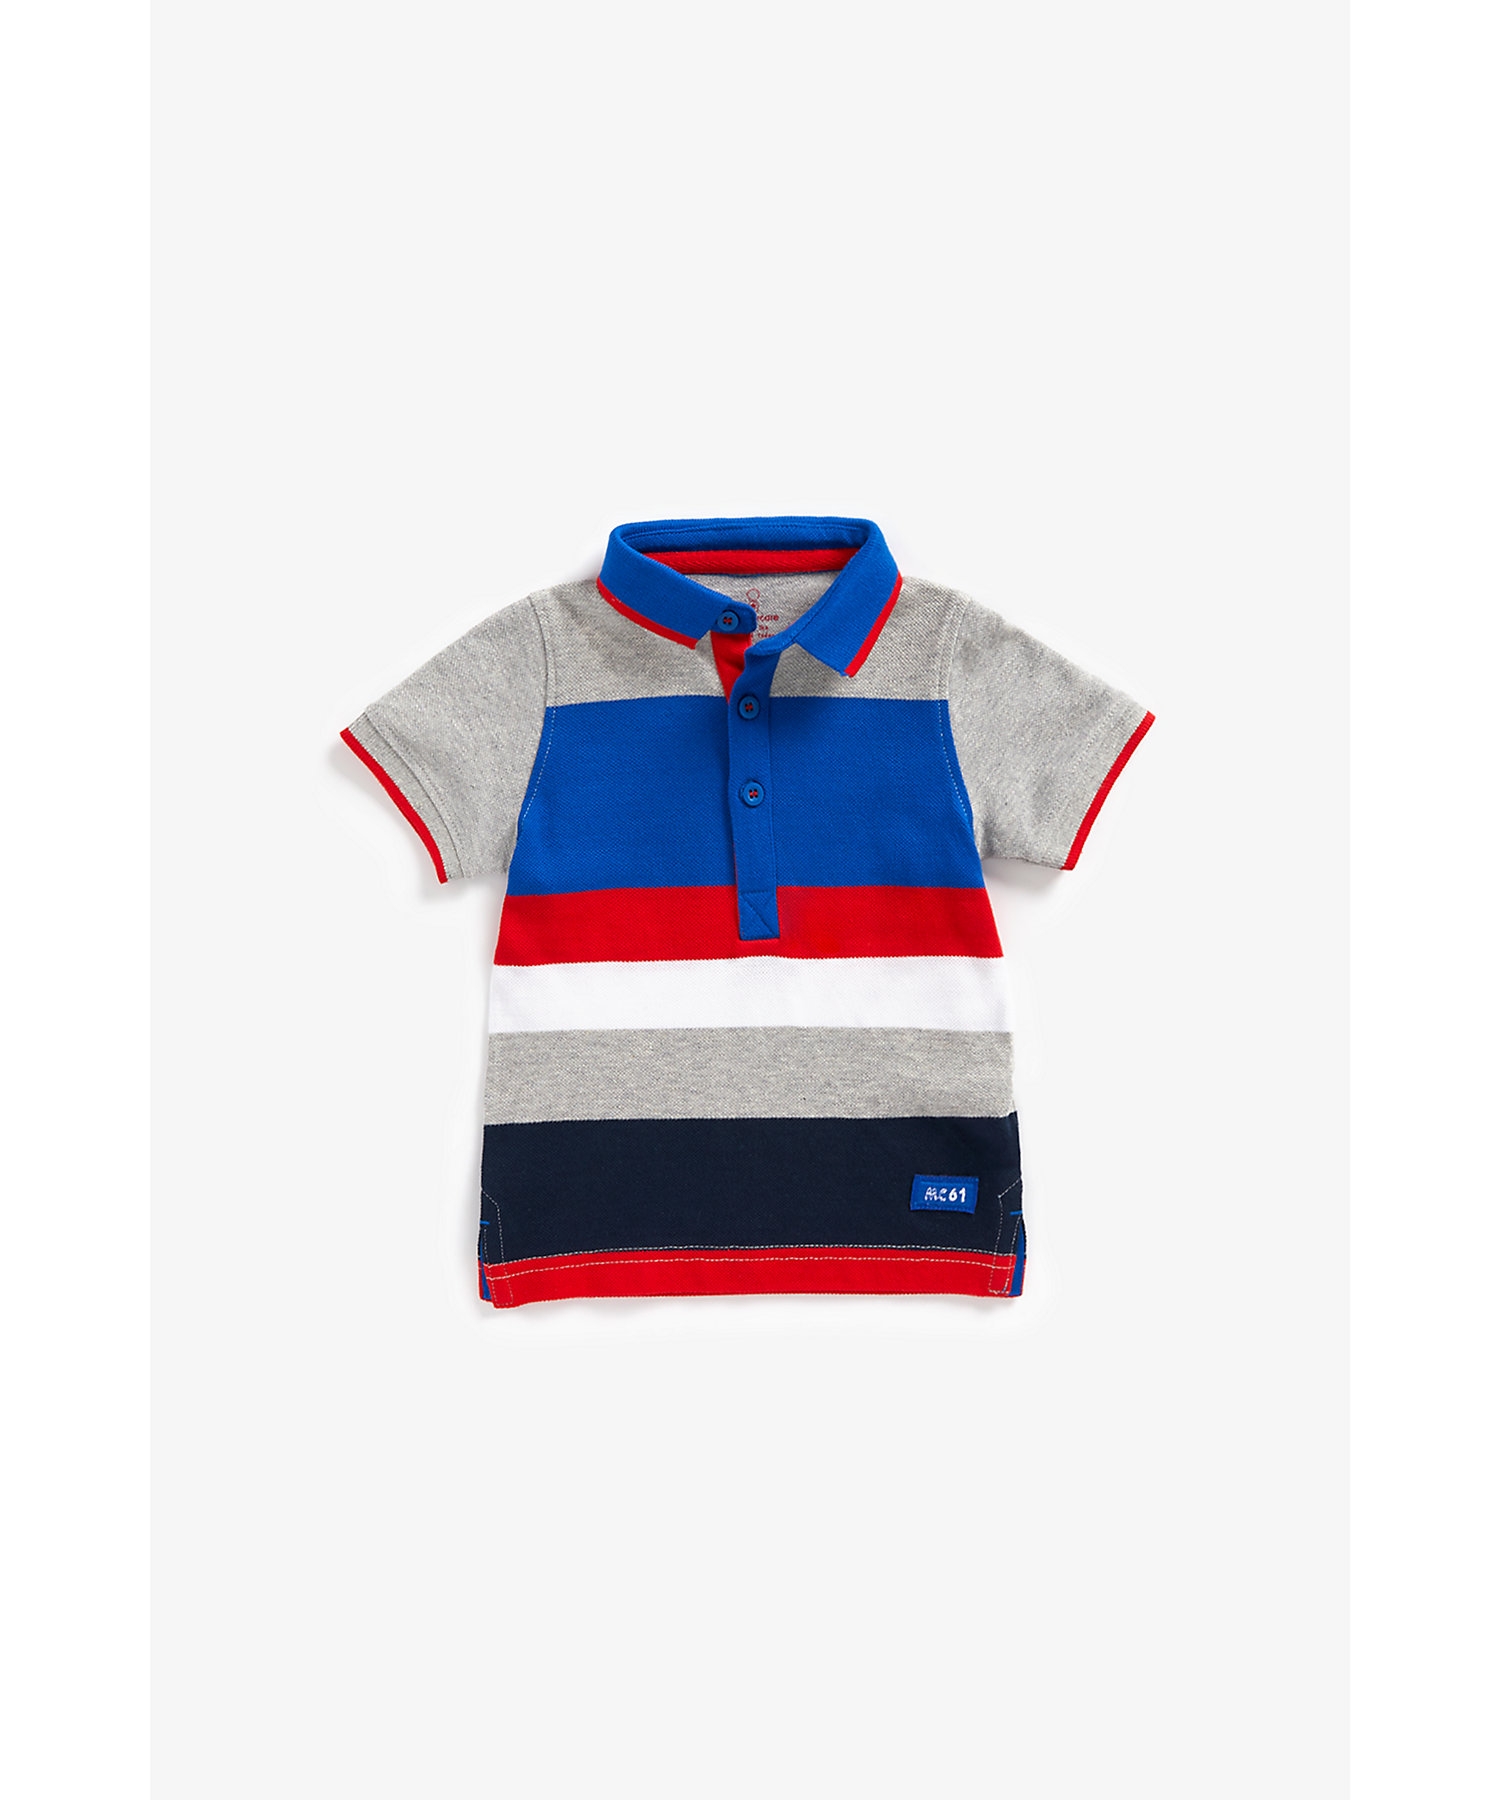 Boys Short Sleeves Polo T-Shirts Striped-Multicolor